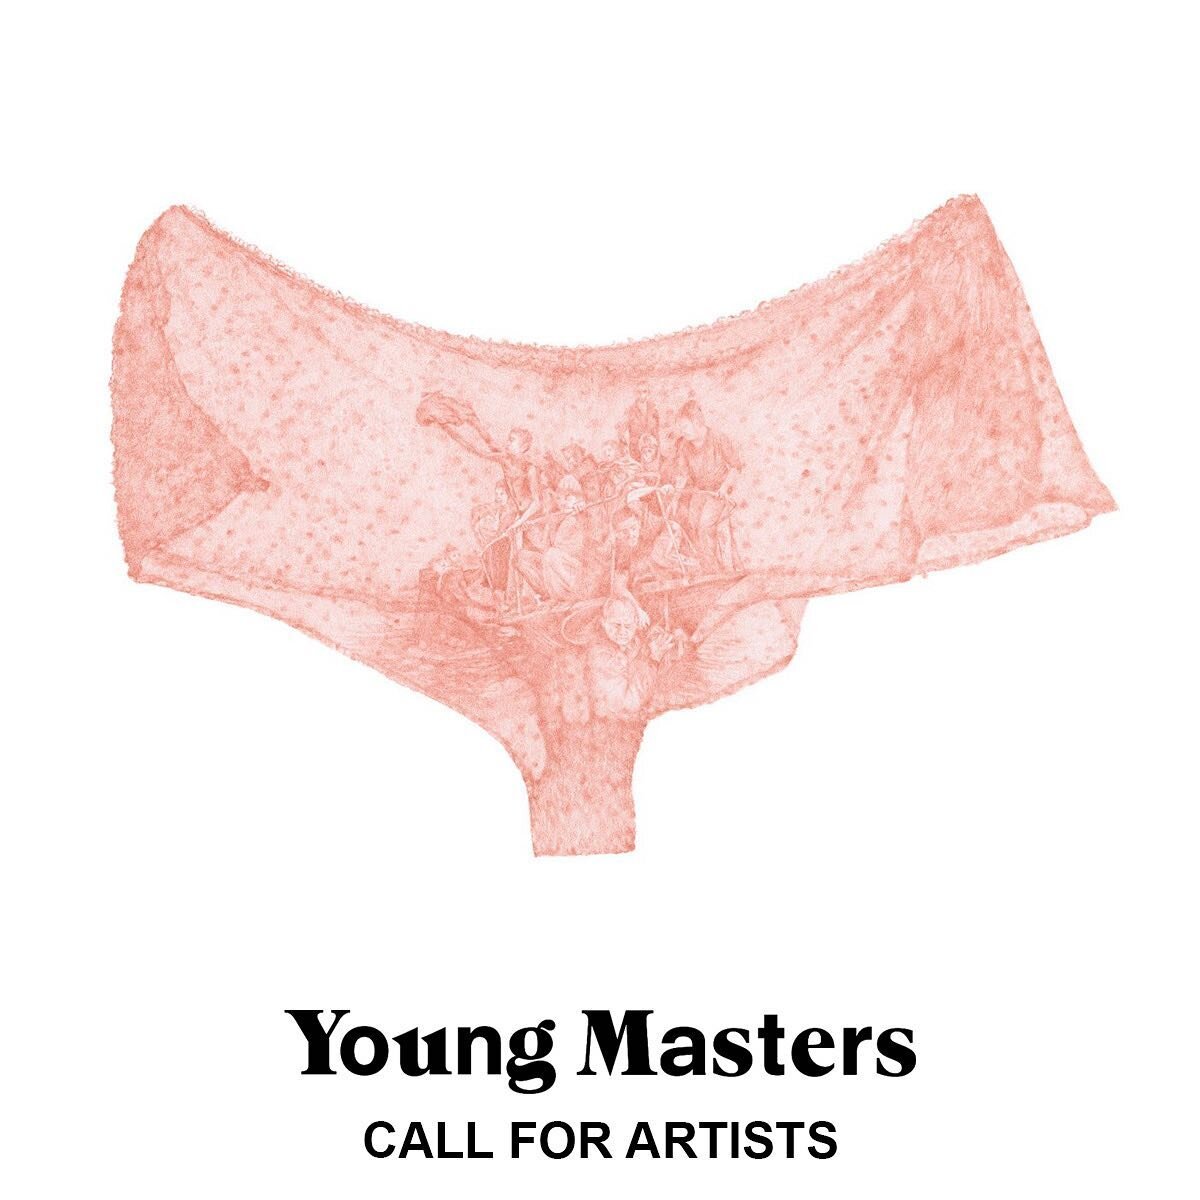 We&rsquo;re celebrating our wonderful #YoungMastersAlumni as we launch our new Call for Artists for 2023!

Azita Moradkhani was the Overall Winner for both the Young Masters Art Prize and the Young Masters Emerging Woman Art Prize in 2017 for her wor